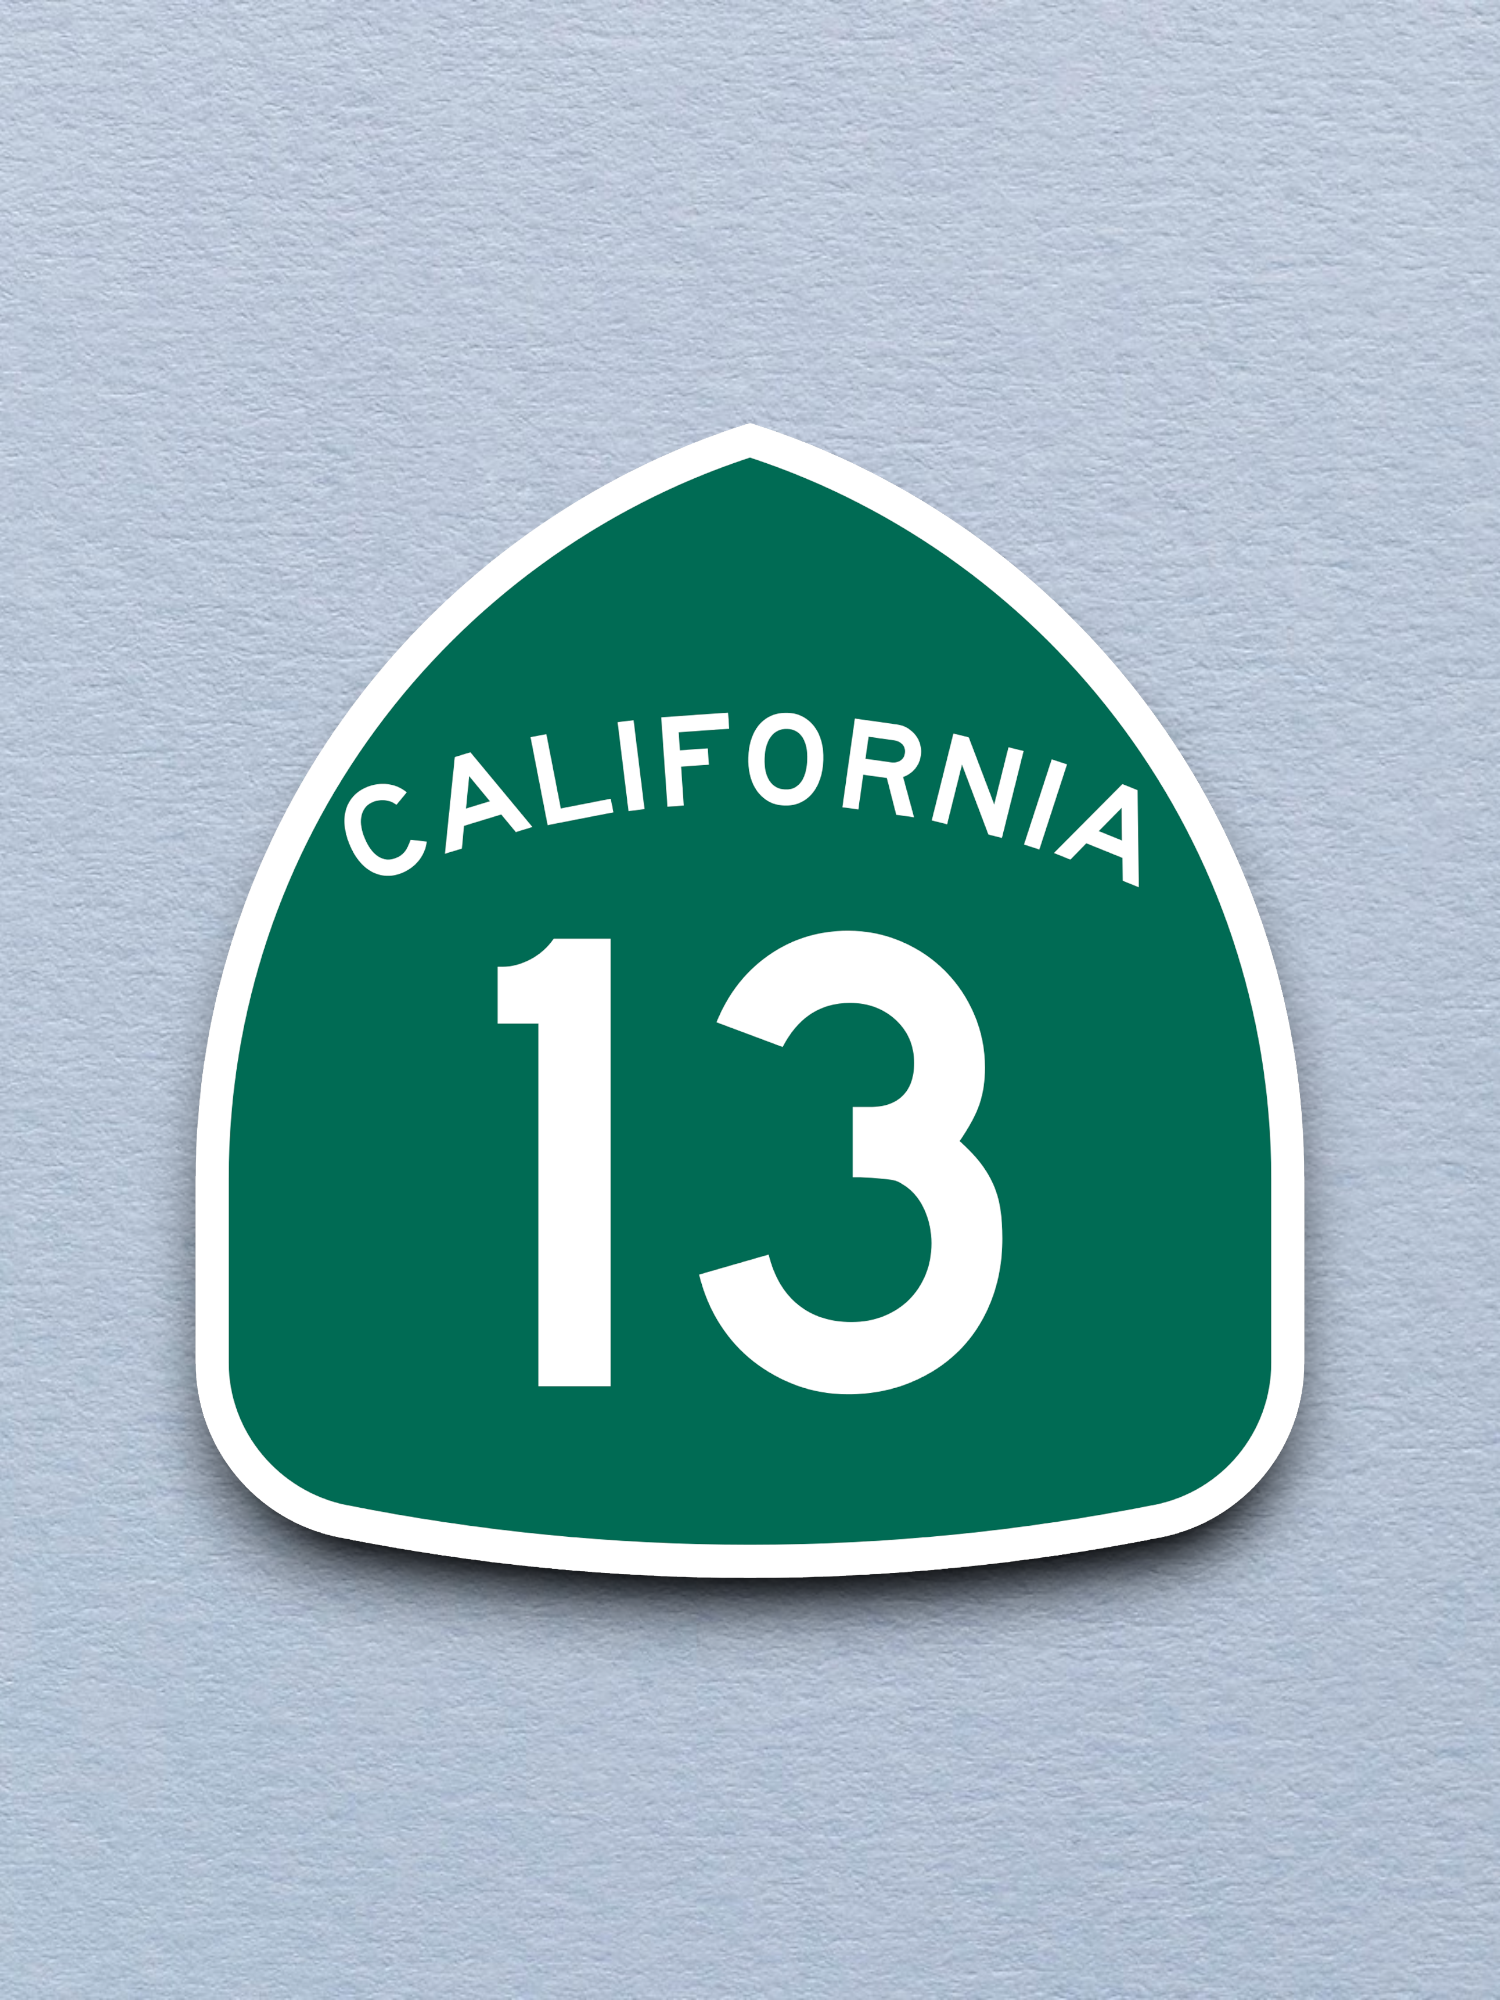 California State Route 13 Road Sign Sticker